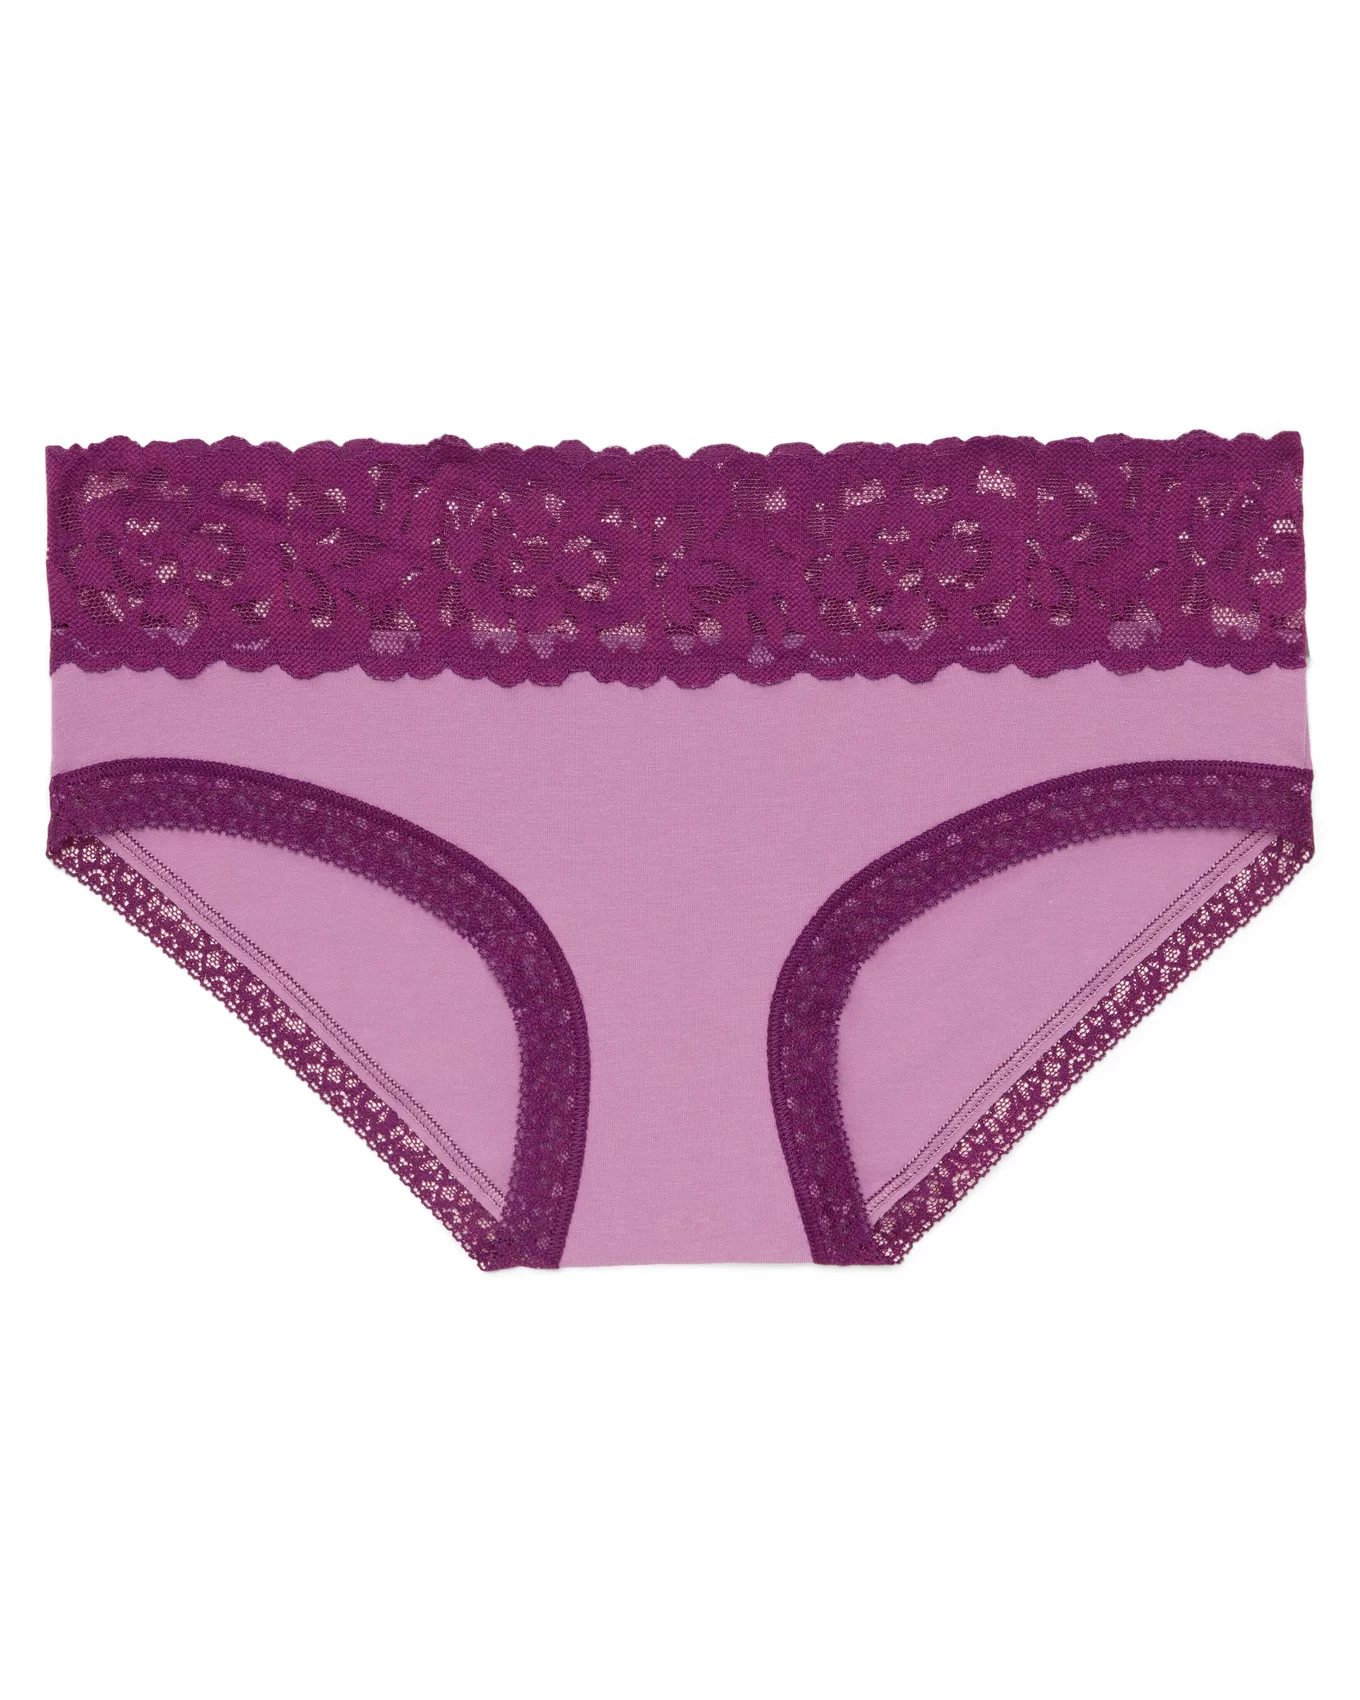 La Senza Ready to Play Pink Lace Up Hipster Panty